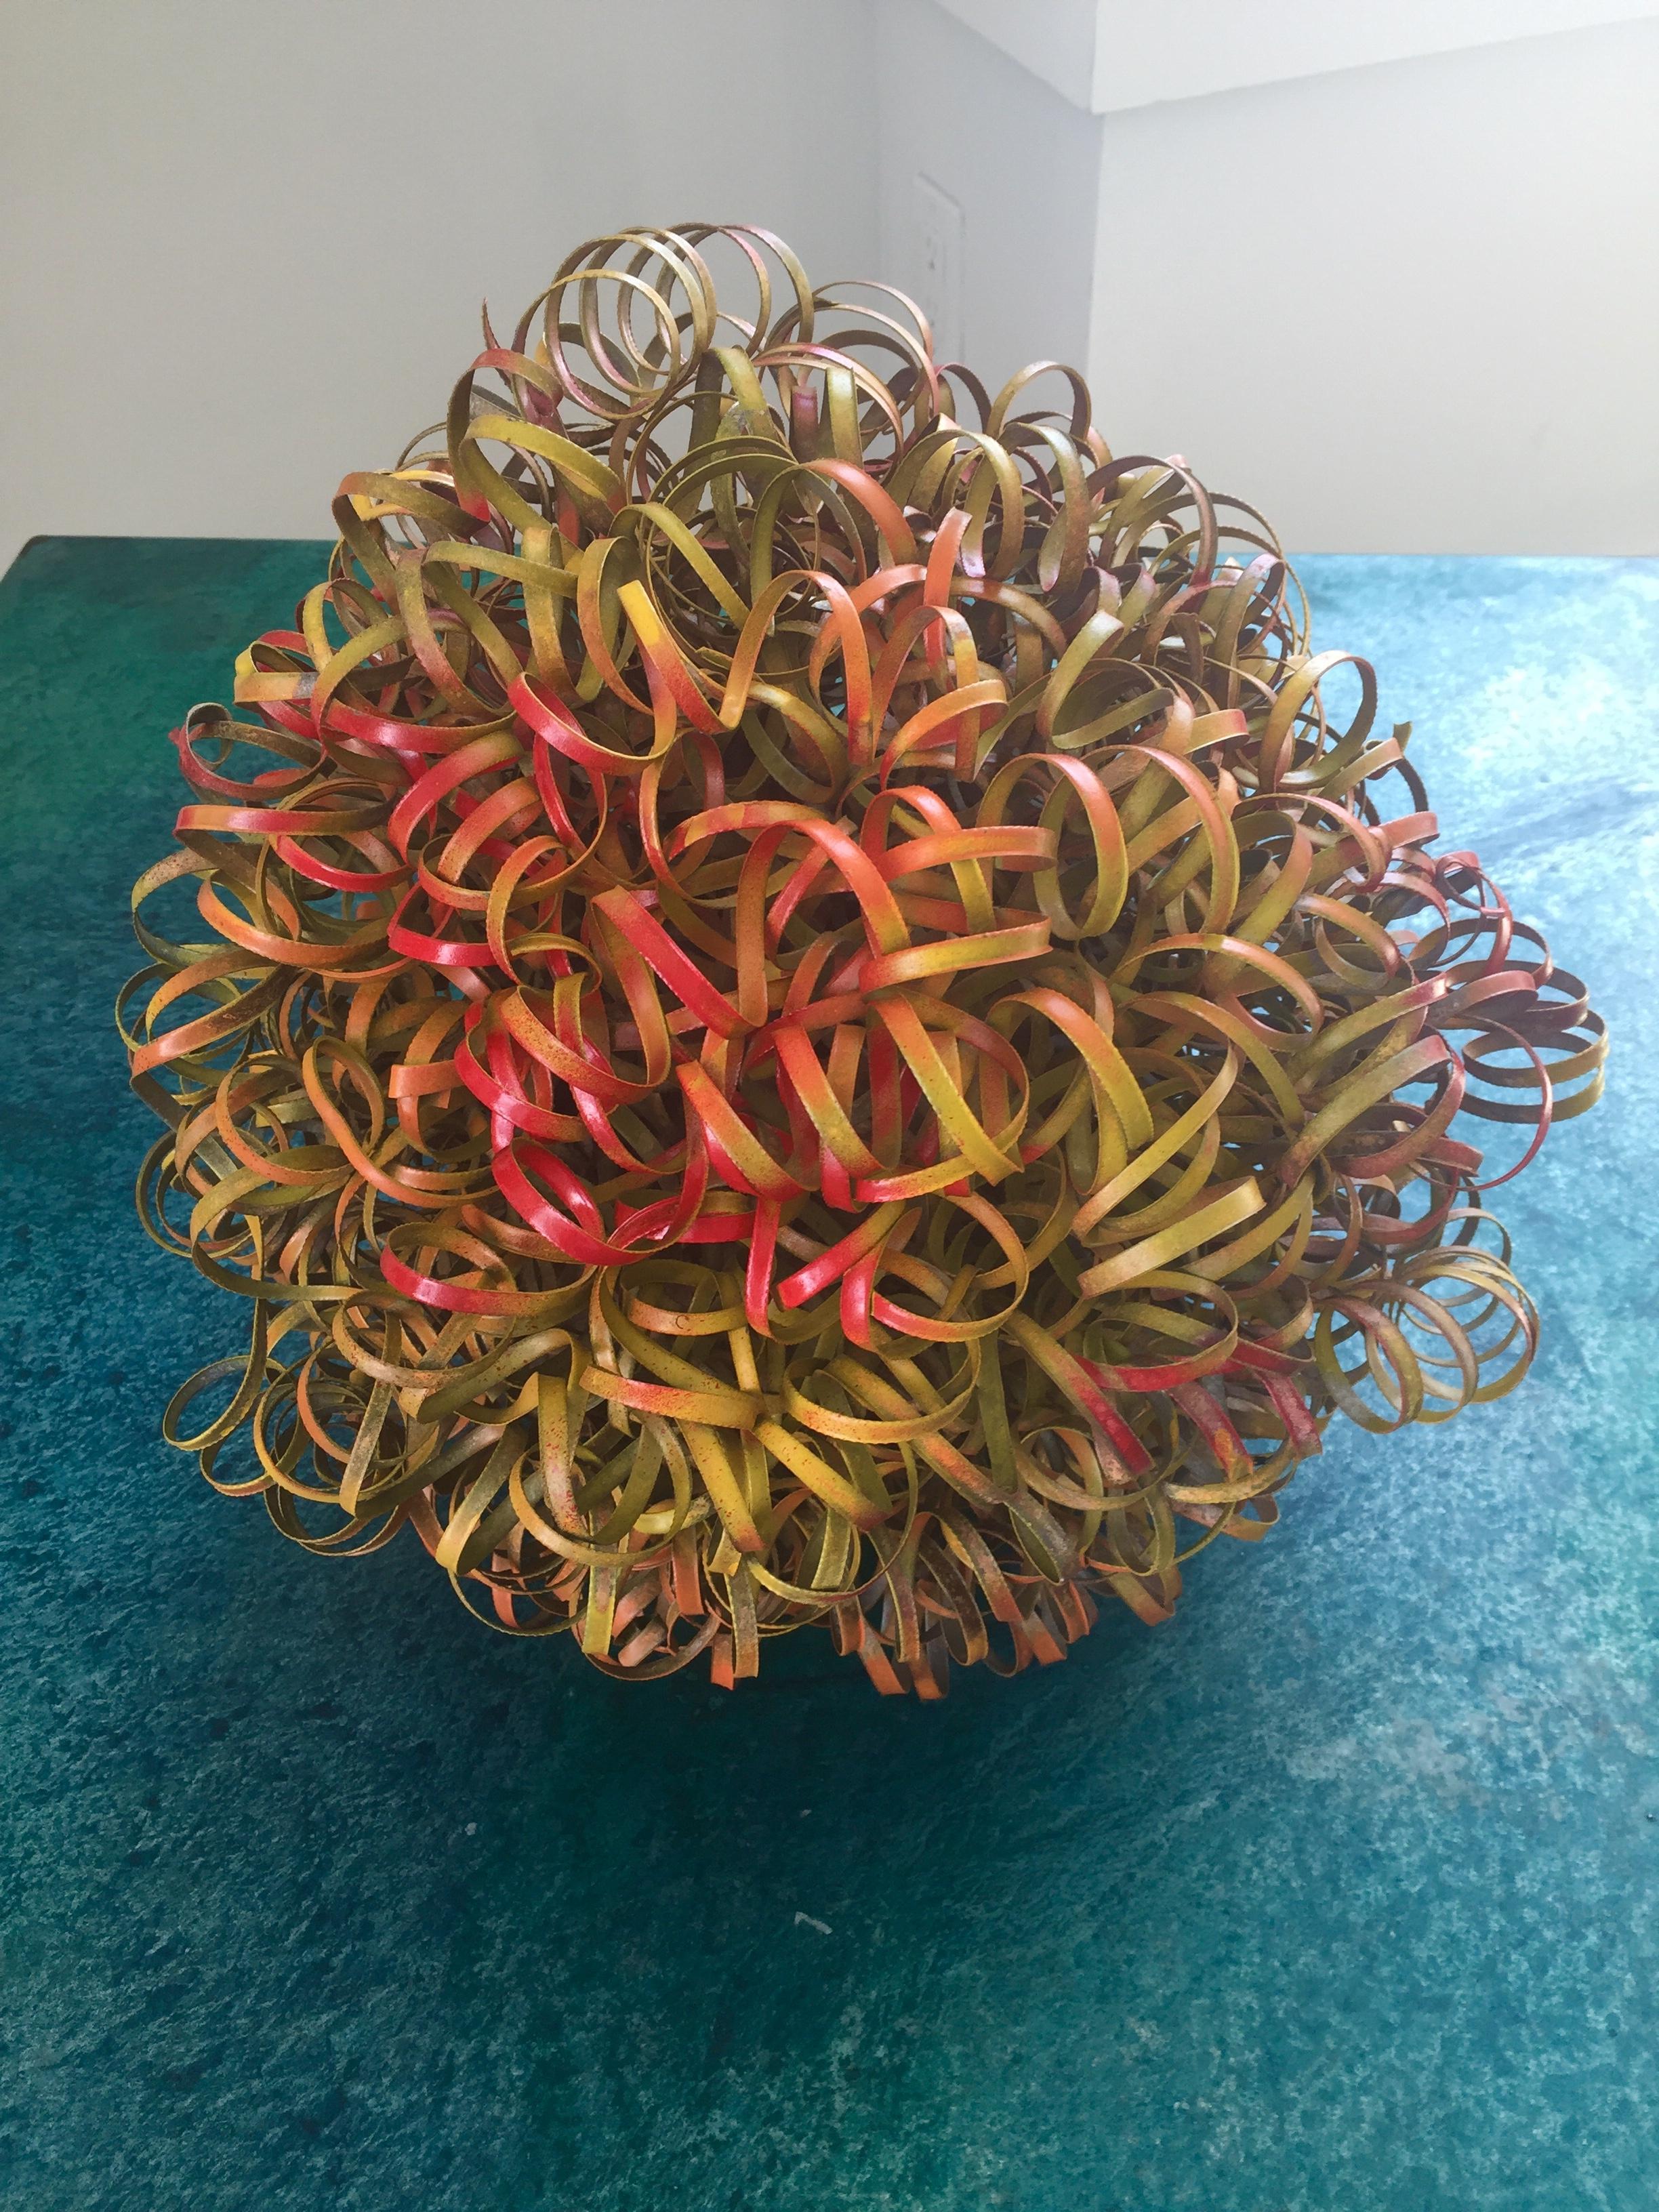 Copper Wire Spiral Ball Sculpture (Bright Red, Yellow, and Orange)
Sculpture with Industrial Urbanized Metal Materials
17